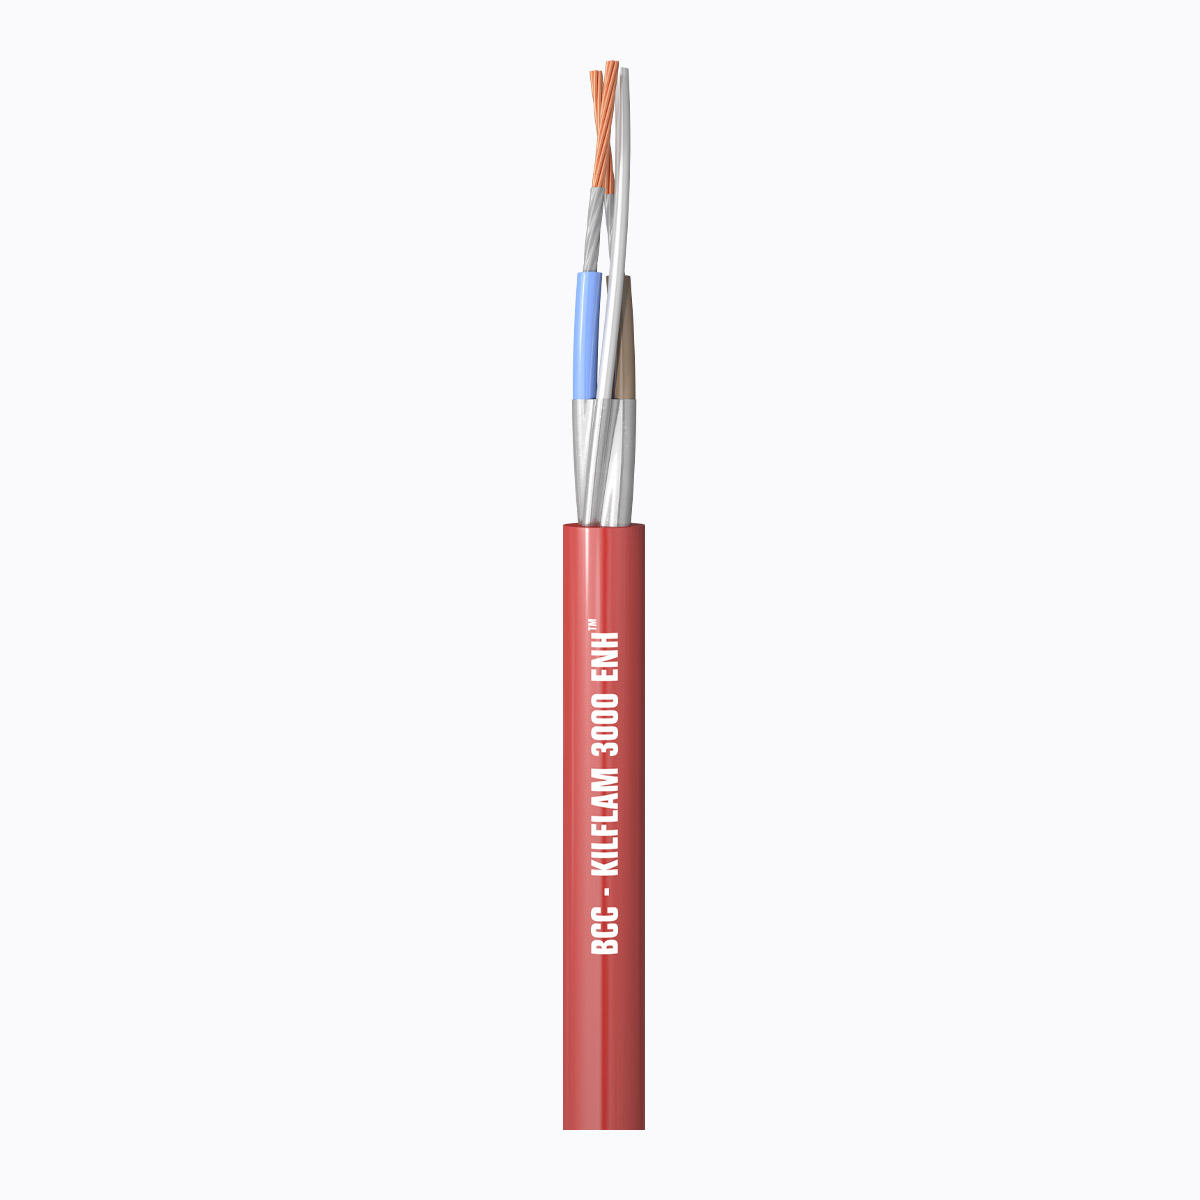 Kilflam 3000 Enhanced Fire Resistant Cable